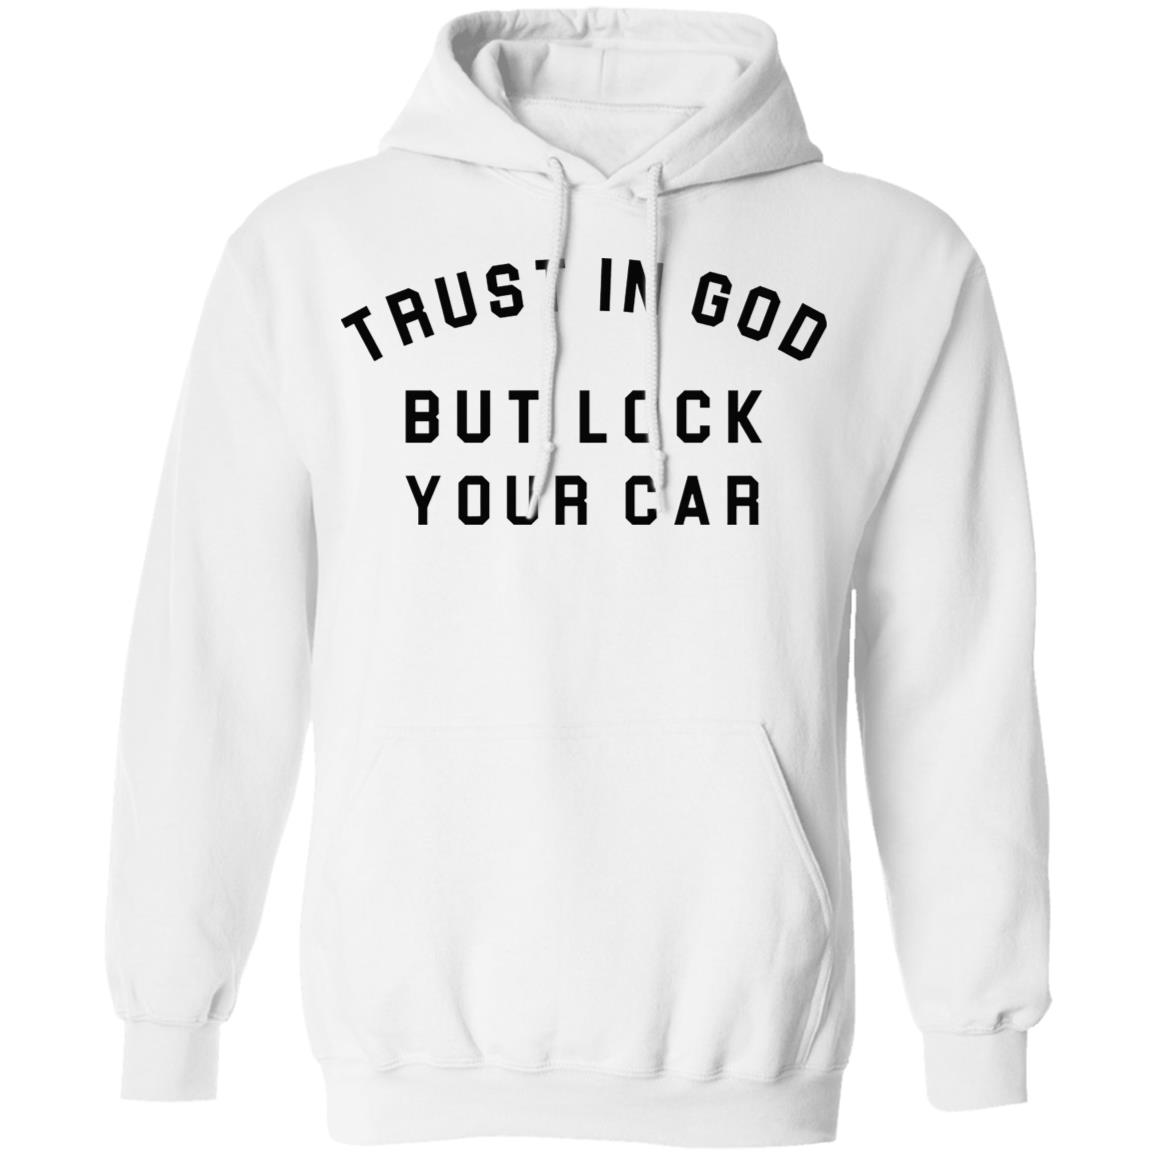 Trust in God but lock your car shirt, Hoodie